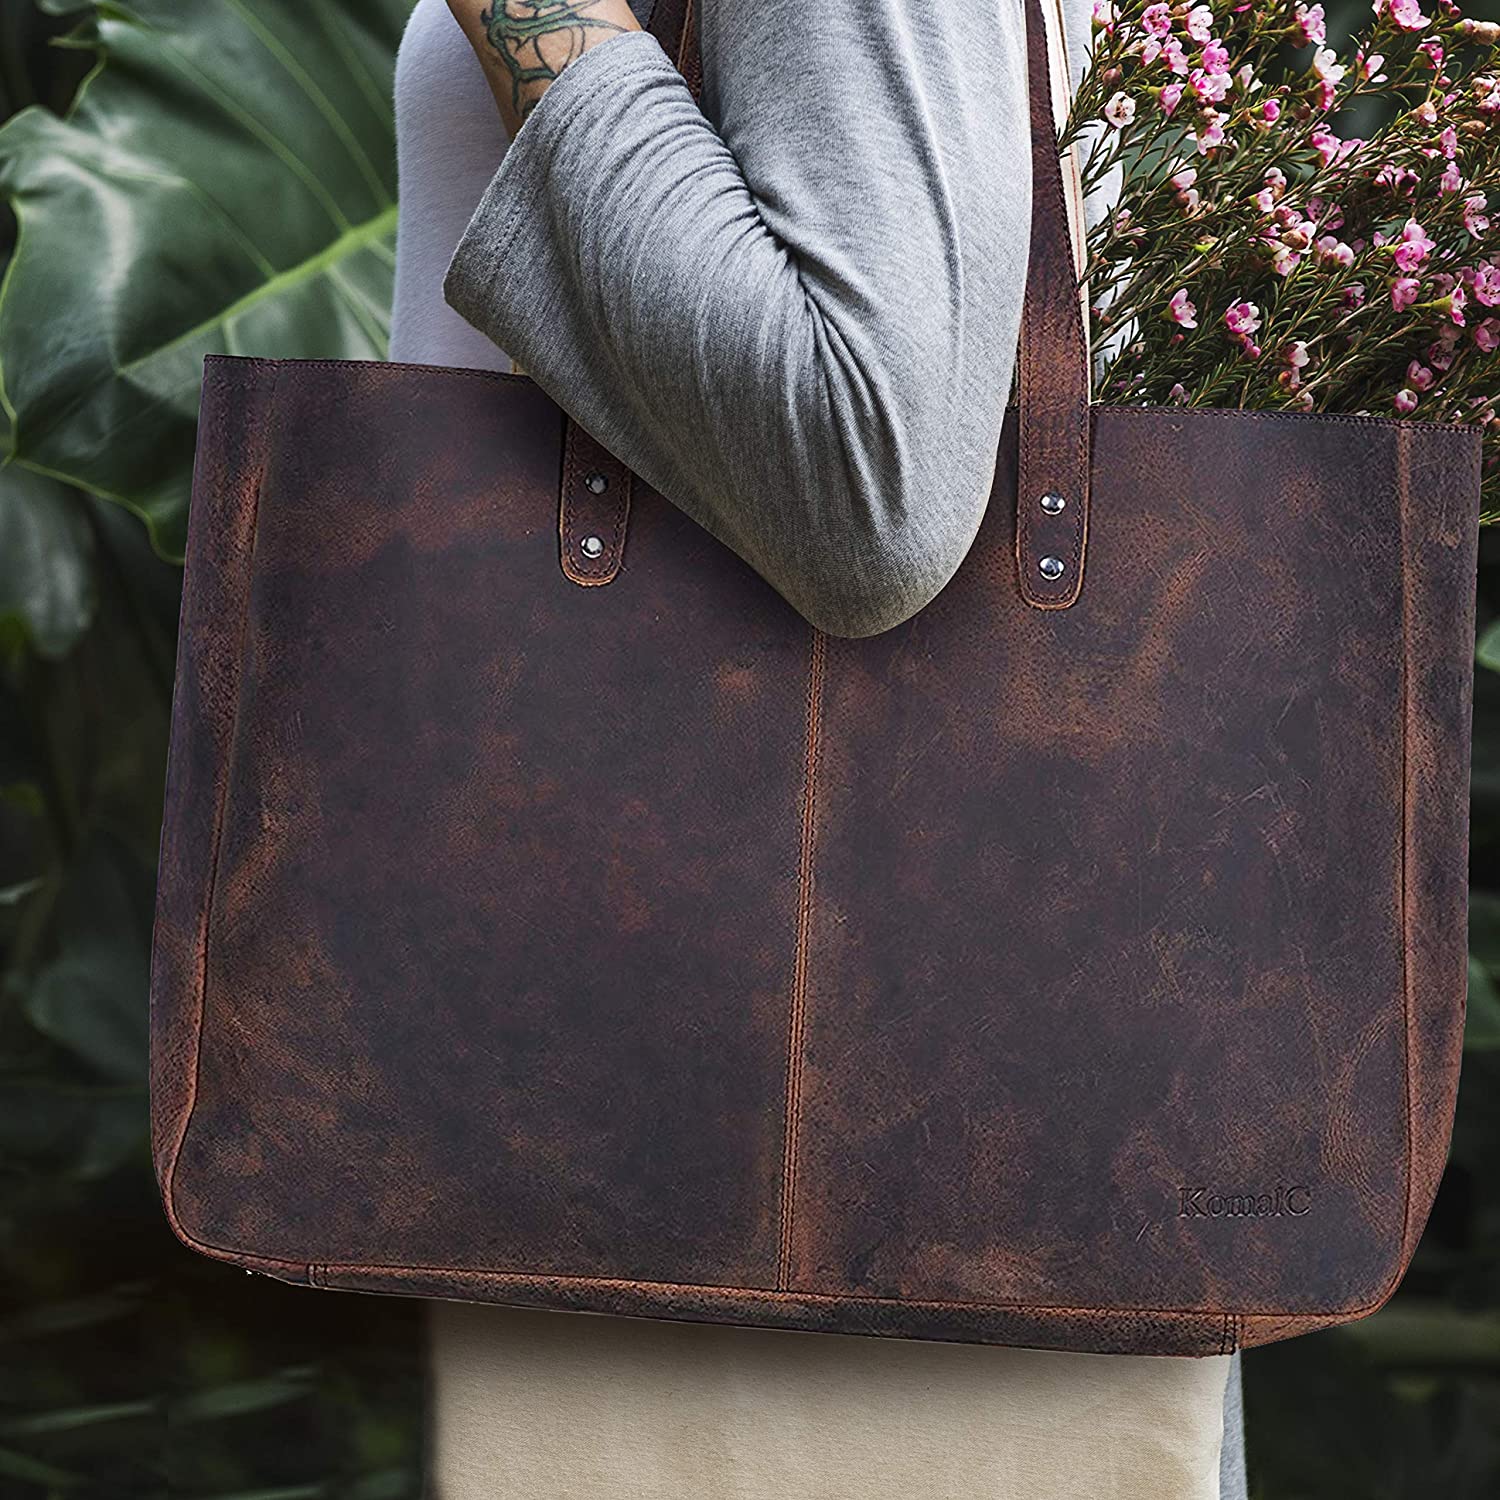 Classic Leather Bag Work Tote - Artisan Leather by Sole Survivor